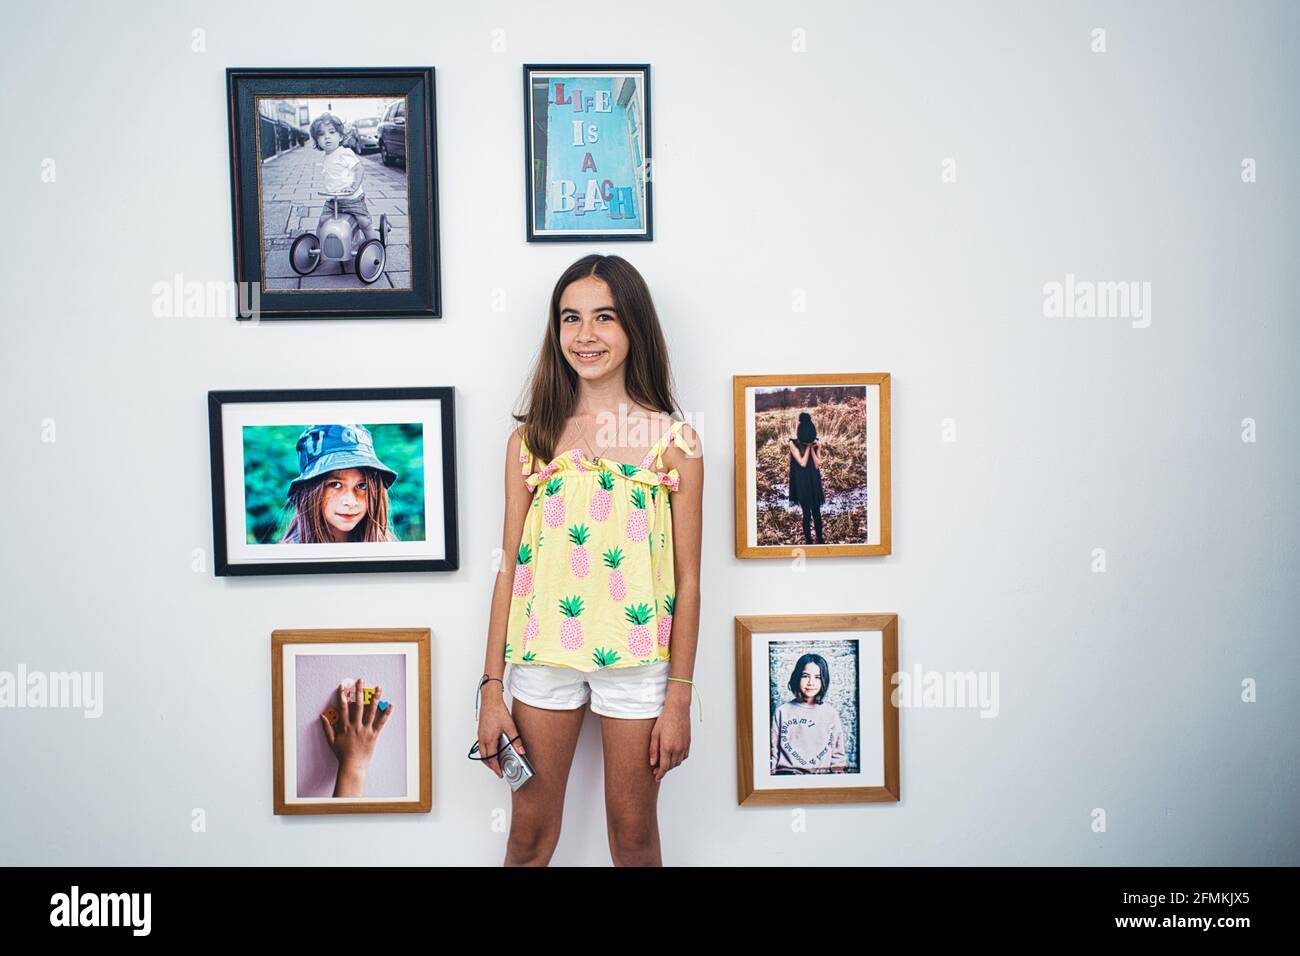 young girl with camera standing against picture frames on wall at home. Stock Photo